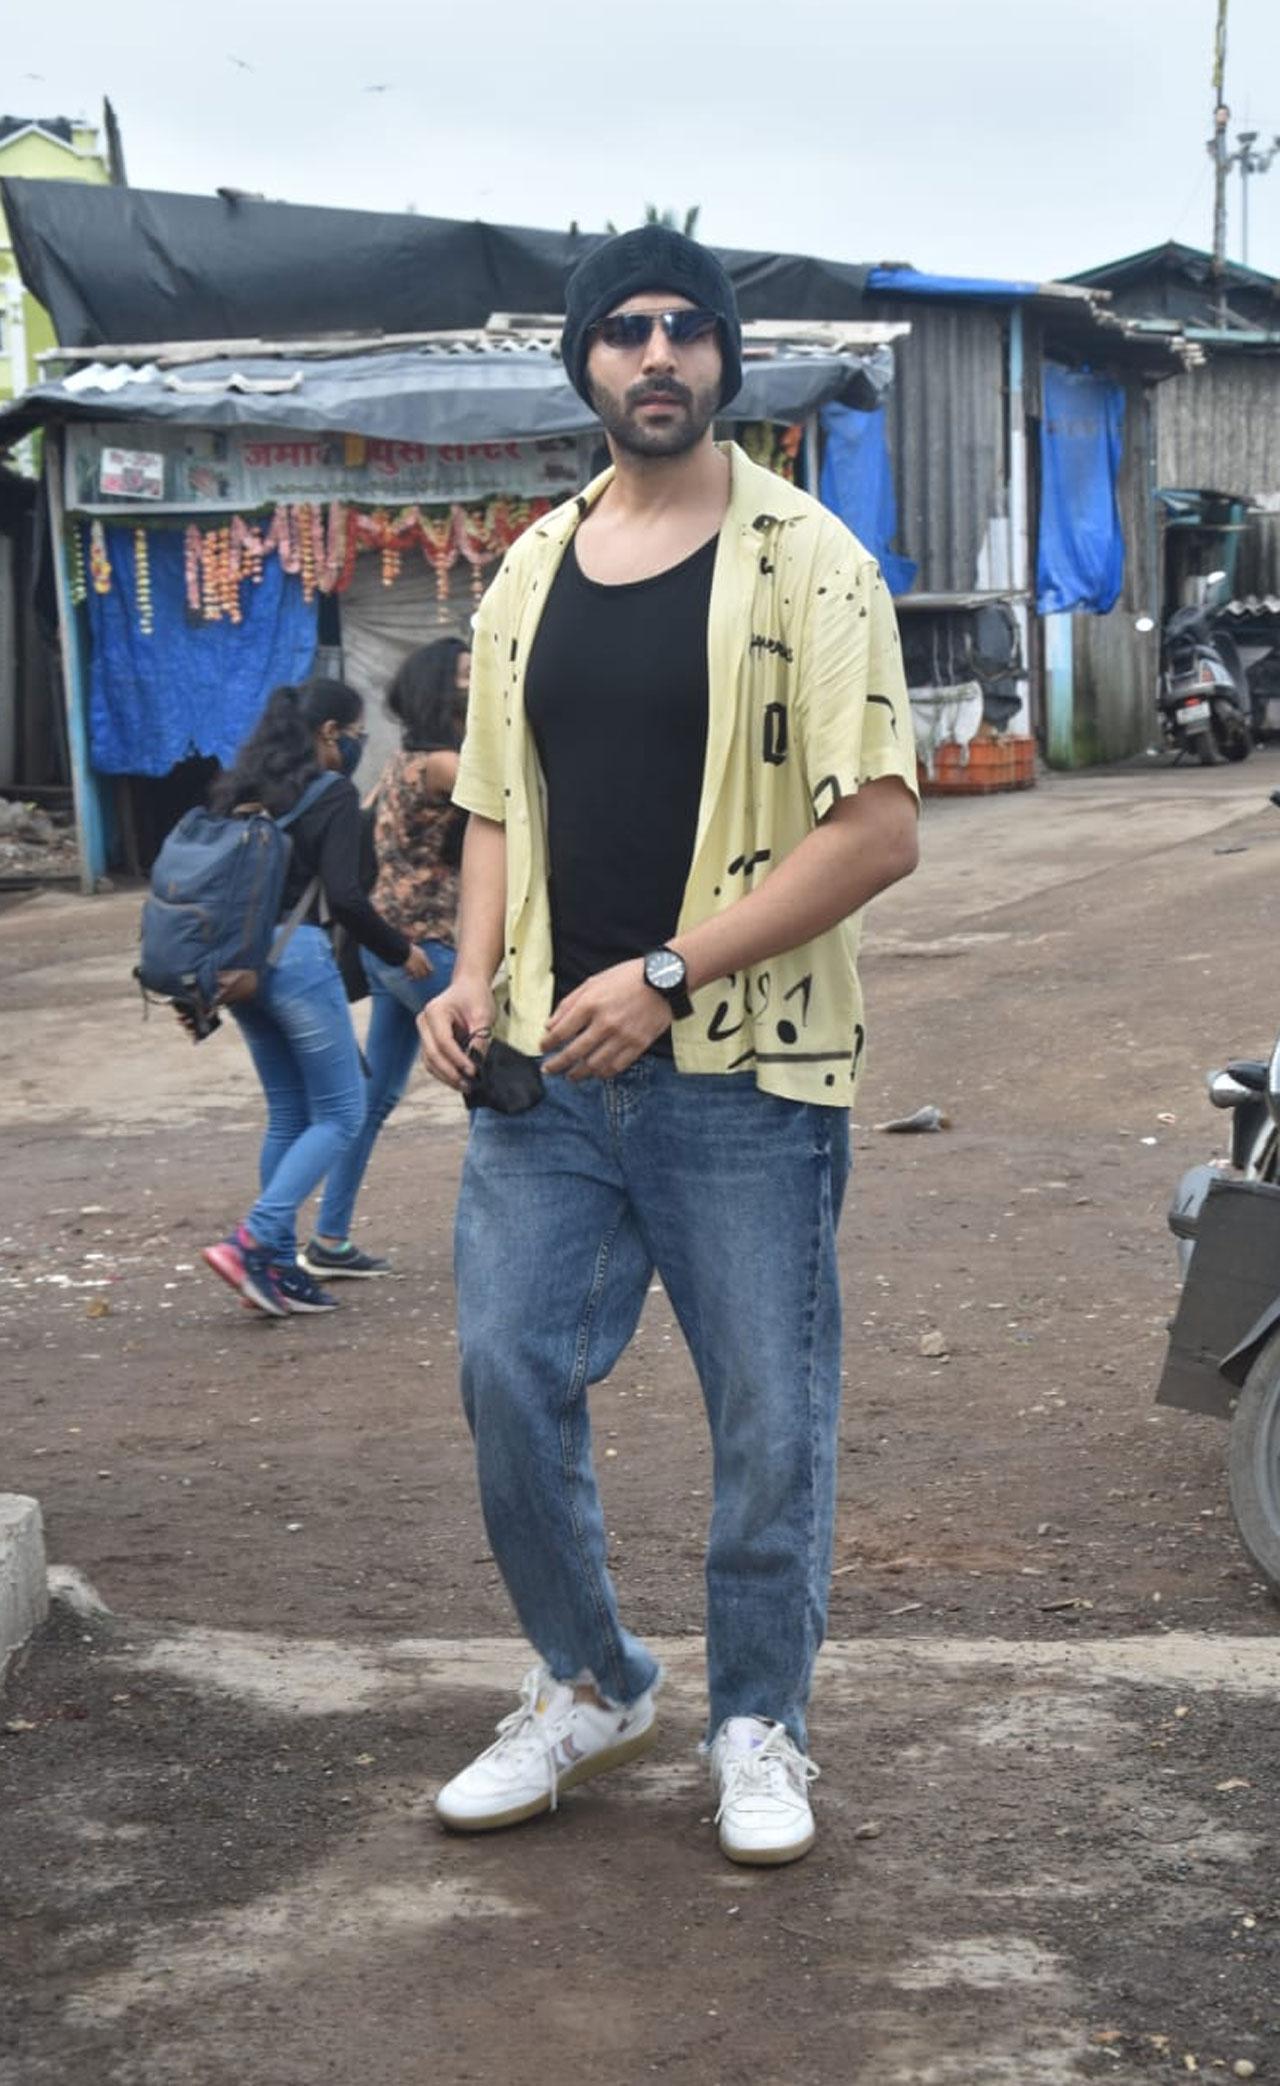 Kartik Aaryan took the Versova Jetty early morning to shoot for his upcoming film 'Freddy'. The actor is one of the busiest names in the industry currently and has multiple films coming up. 